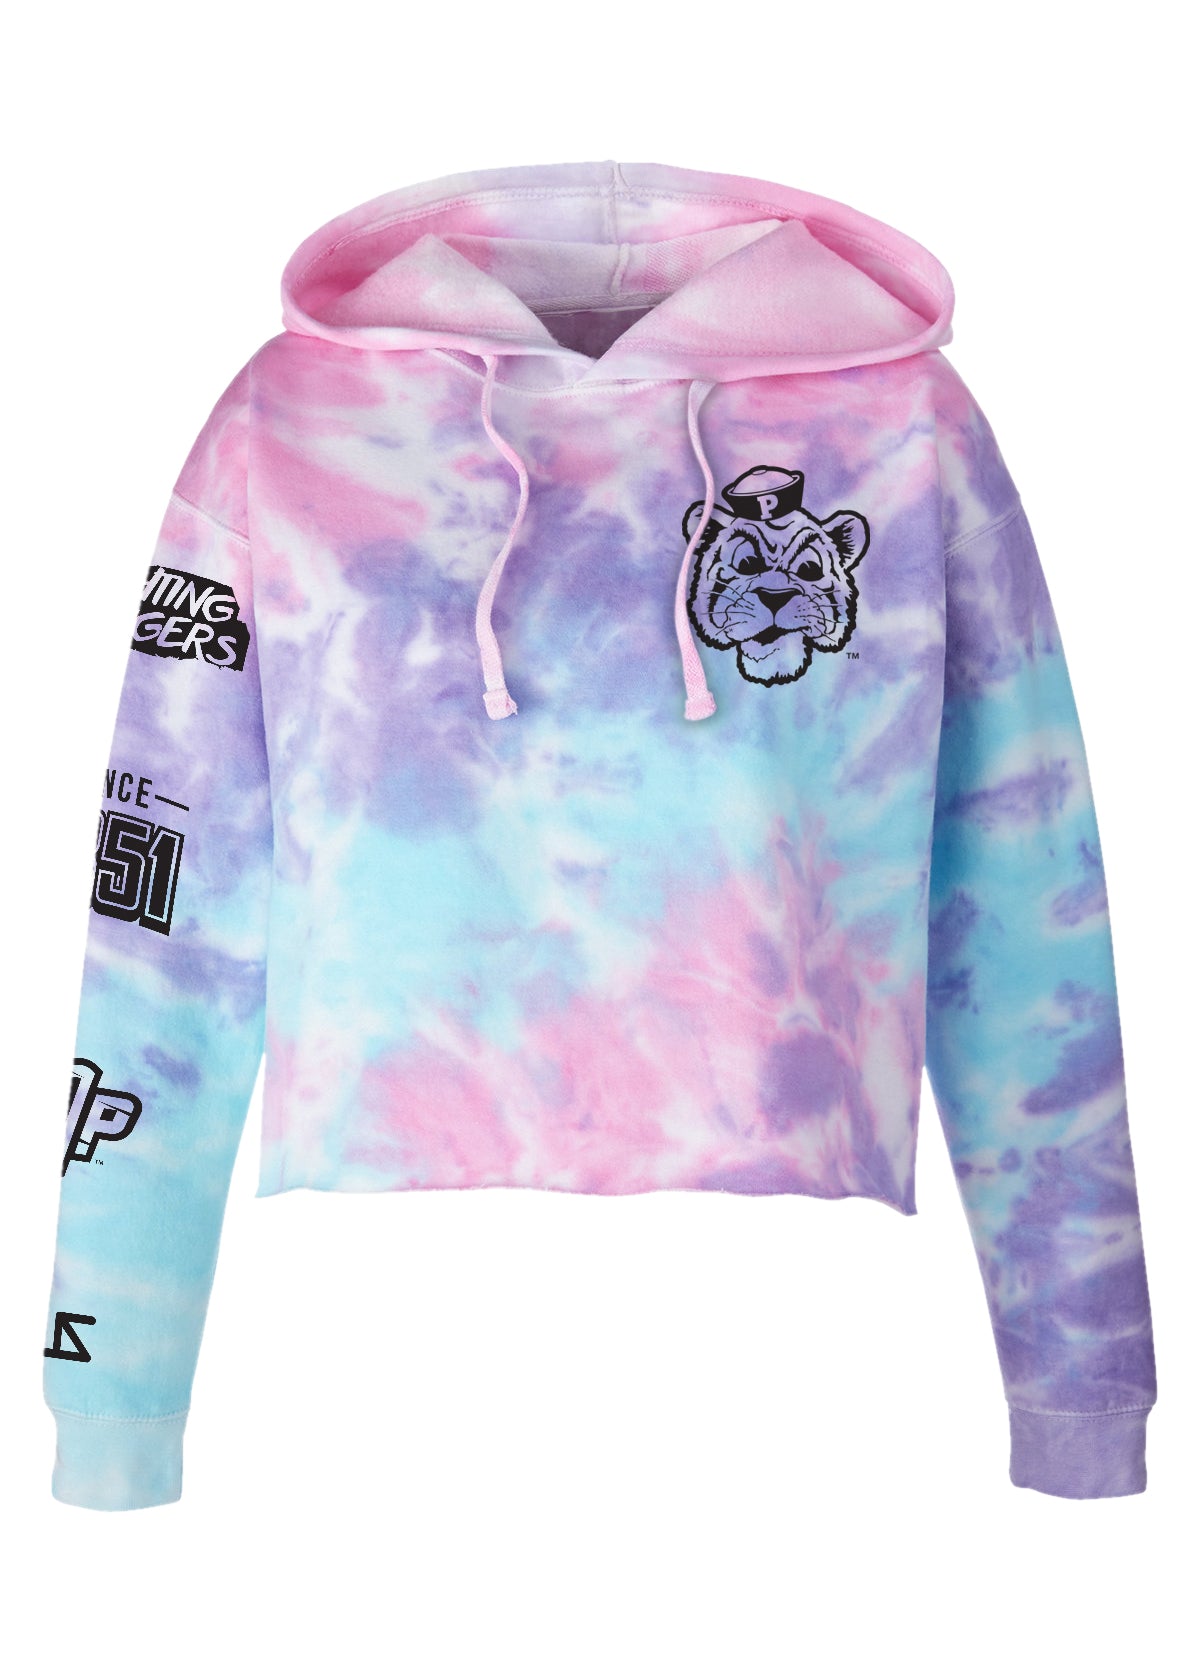 Pacific Tigers - Daydreamer Crop Hooded Sweatshirt [LIMITED EDITION]